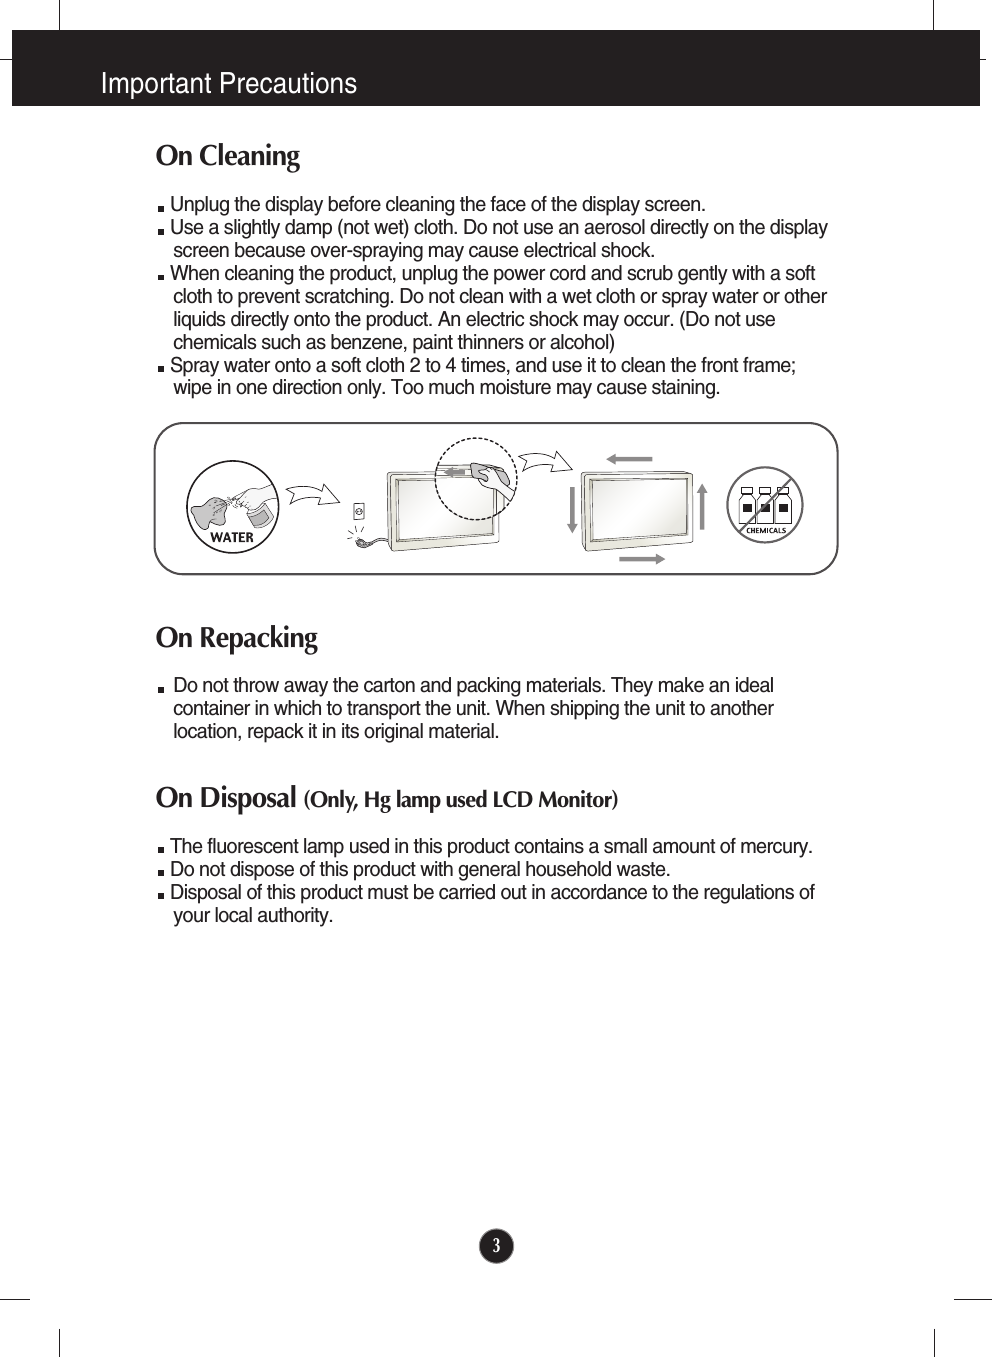 Important Precautions3On CleaningUnplug the display before cleaning the face of the display screen.Use a slightly damp (not wet) cloth. Do not use an aerosol directly on the displayscreen because over-spraying may cause electrical shock.When cleaning the product, unplug the power cord and scrub gently with a softcloth to prevent scratching. Do not clean with a wet cloth or spray water or otherliquids directly onto the product. An electric shock may occur. (Do not usechemicals such as benzene, paint thinners or alcohol) Spray water onto a soft cloth 2 to 4 times, and use it to clean the front frame;wipe in one direction only. Too much moisture may cause staining.  On RepackingDo not throw away the carton and packing materials. They make an idealcontainer in which to transport the unit. When shipping the unit to anotherlocation, repack it in its original material.On Disposal (Only, Hg lamp used LCD Monitor)The fluorescent lamp used in this product contains a small amount of mercury.Do not dispose of this product with general household waste.Disposal of this product must be carried out in accordance to the regulations ofyour local authority.